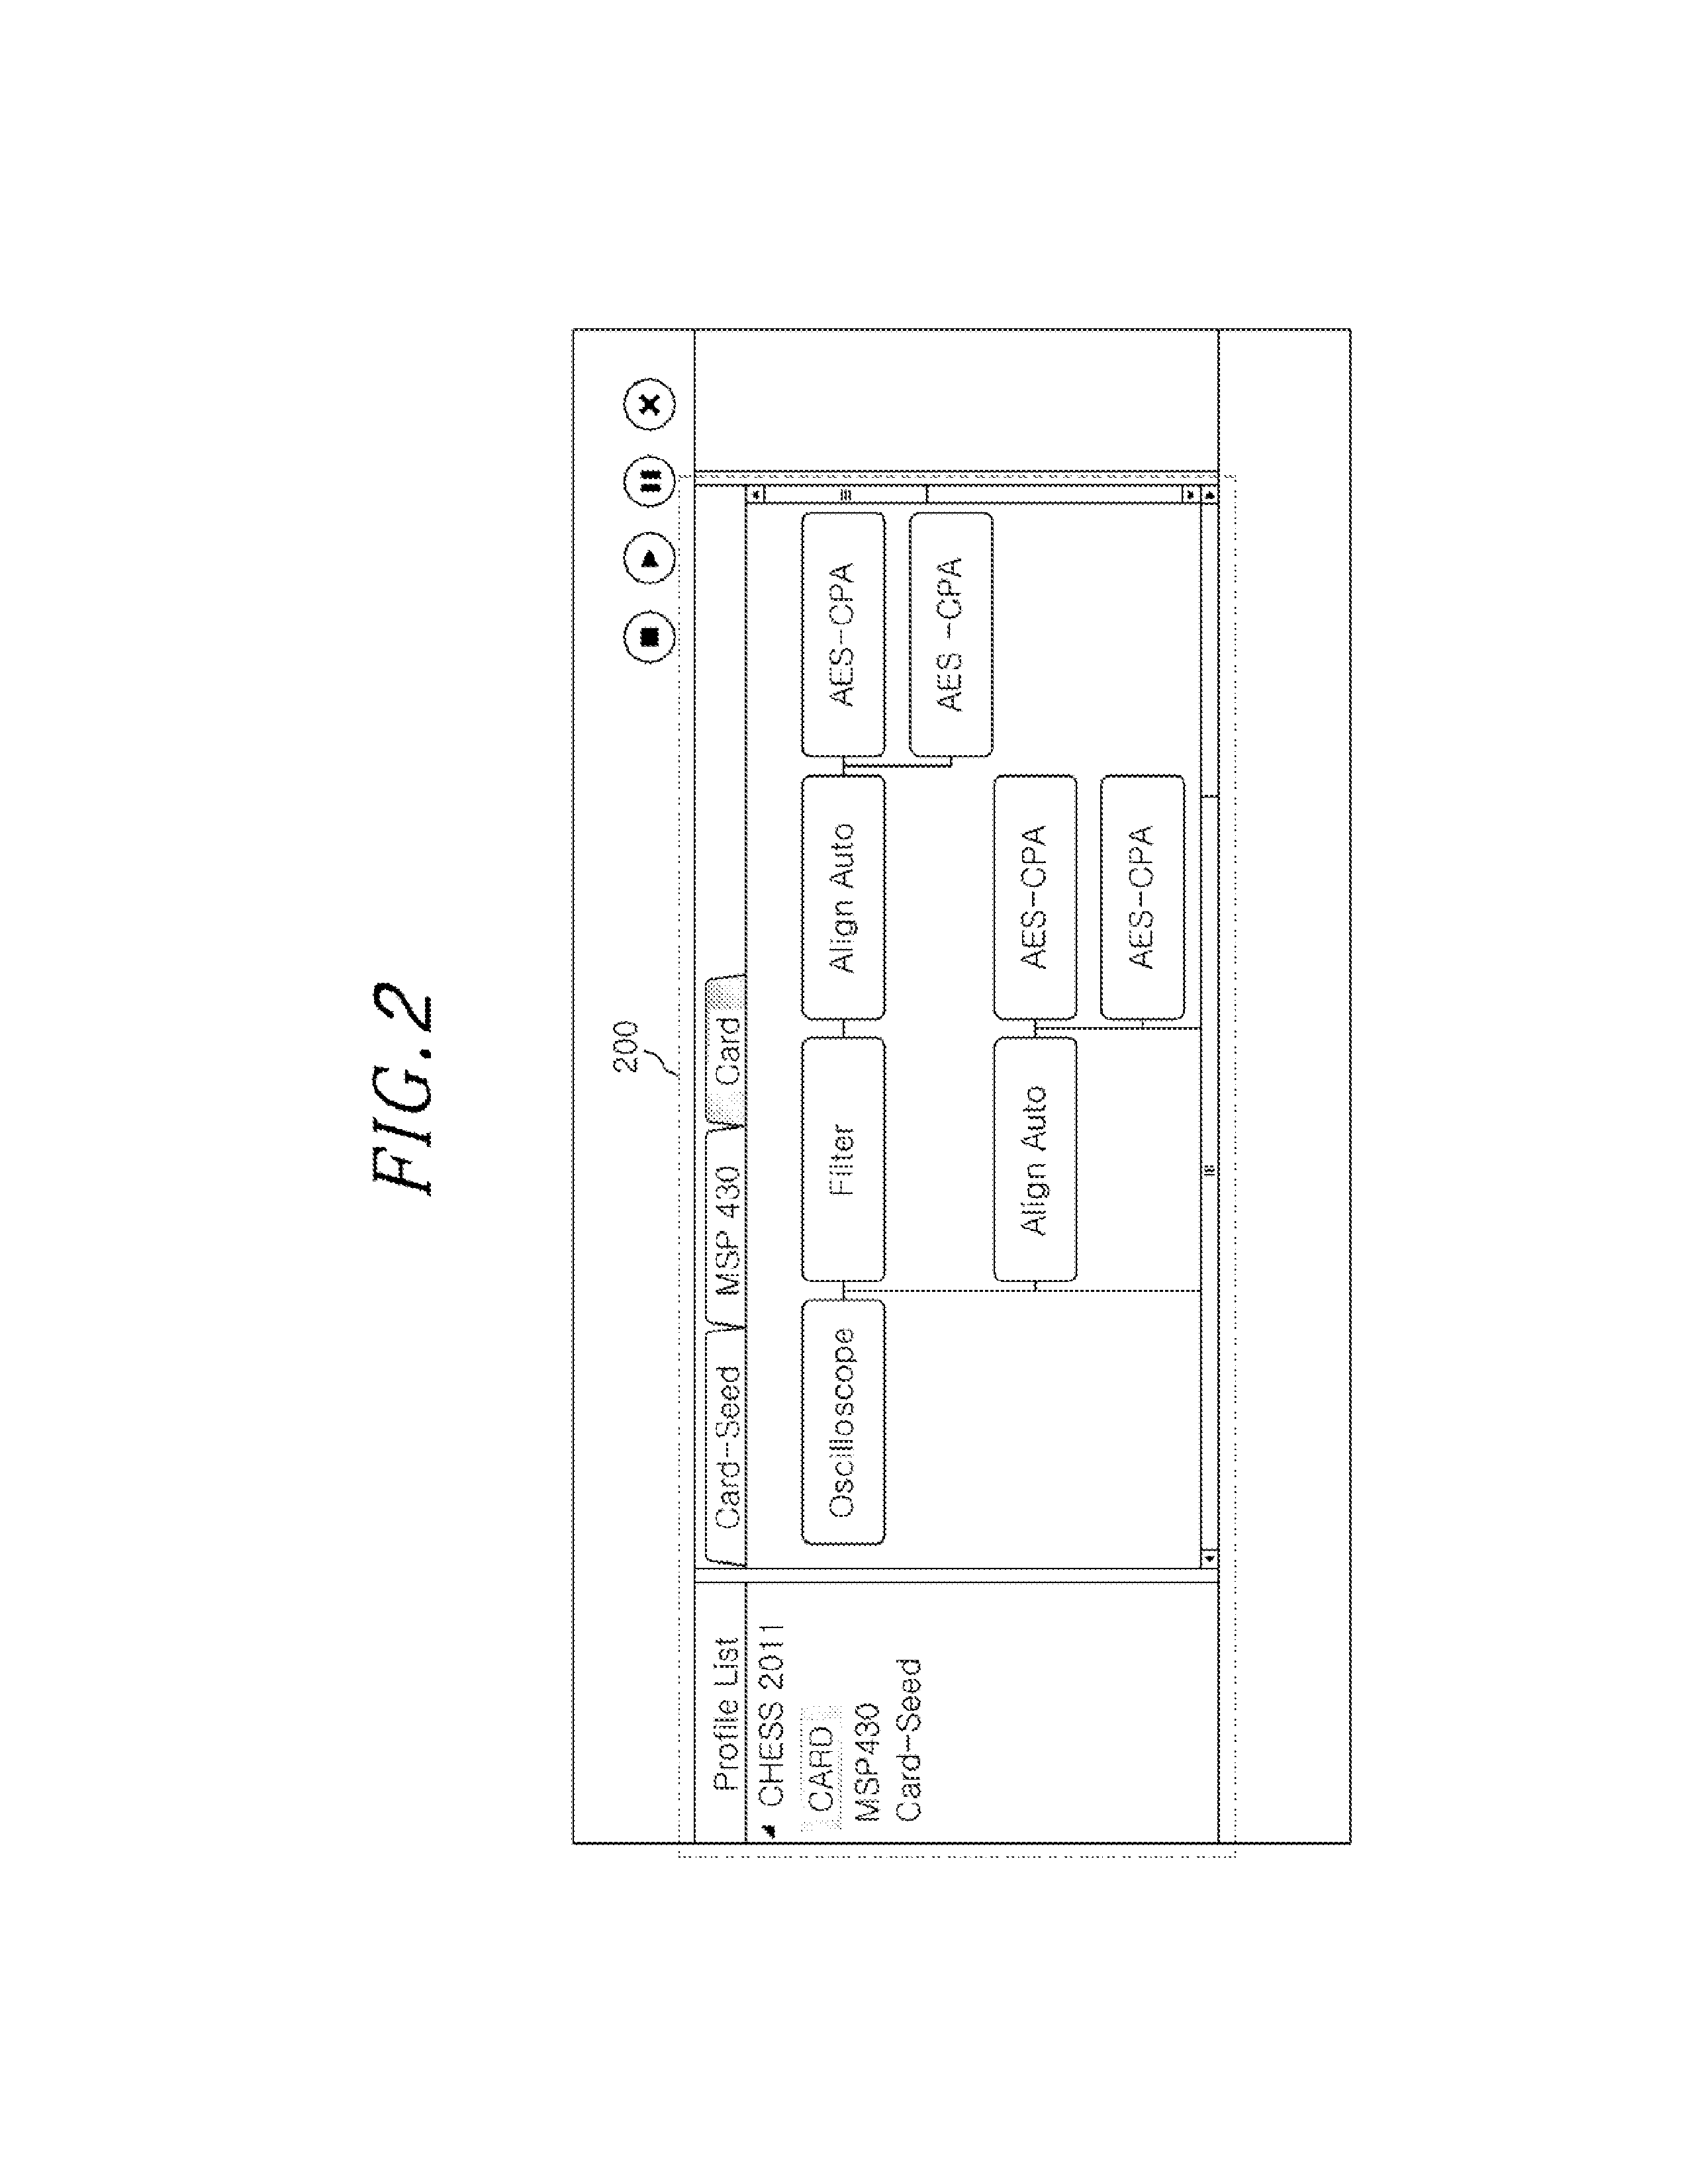 Side-channel analysis apparatus and method based on profile